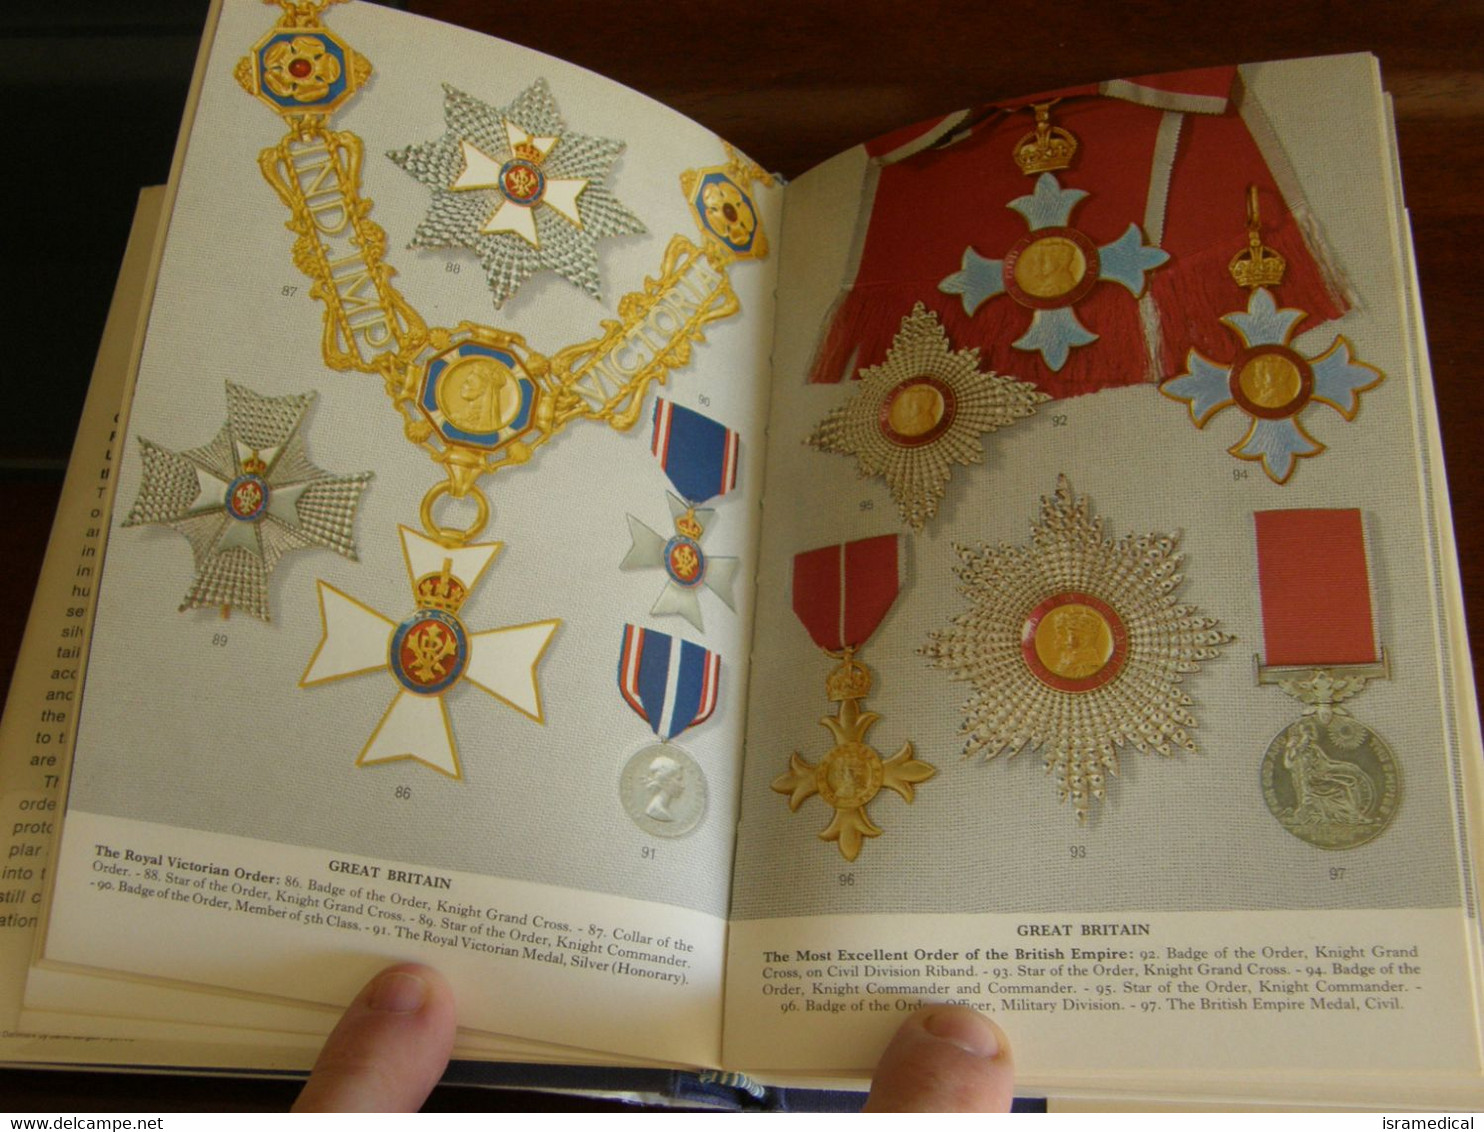 ORDERS AND DECORATIONS OF EUROPE IN COLOR MACMILLAN - Libros & Cds